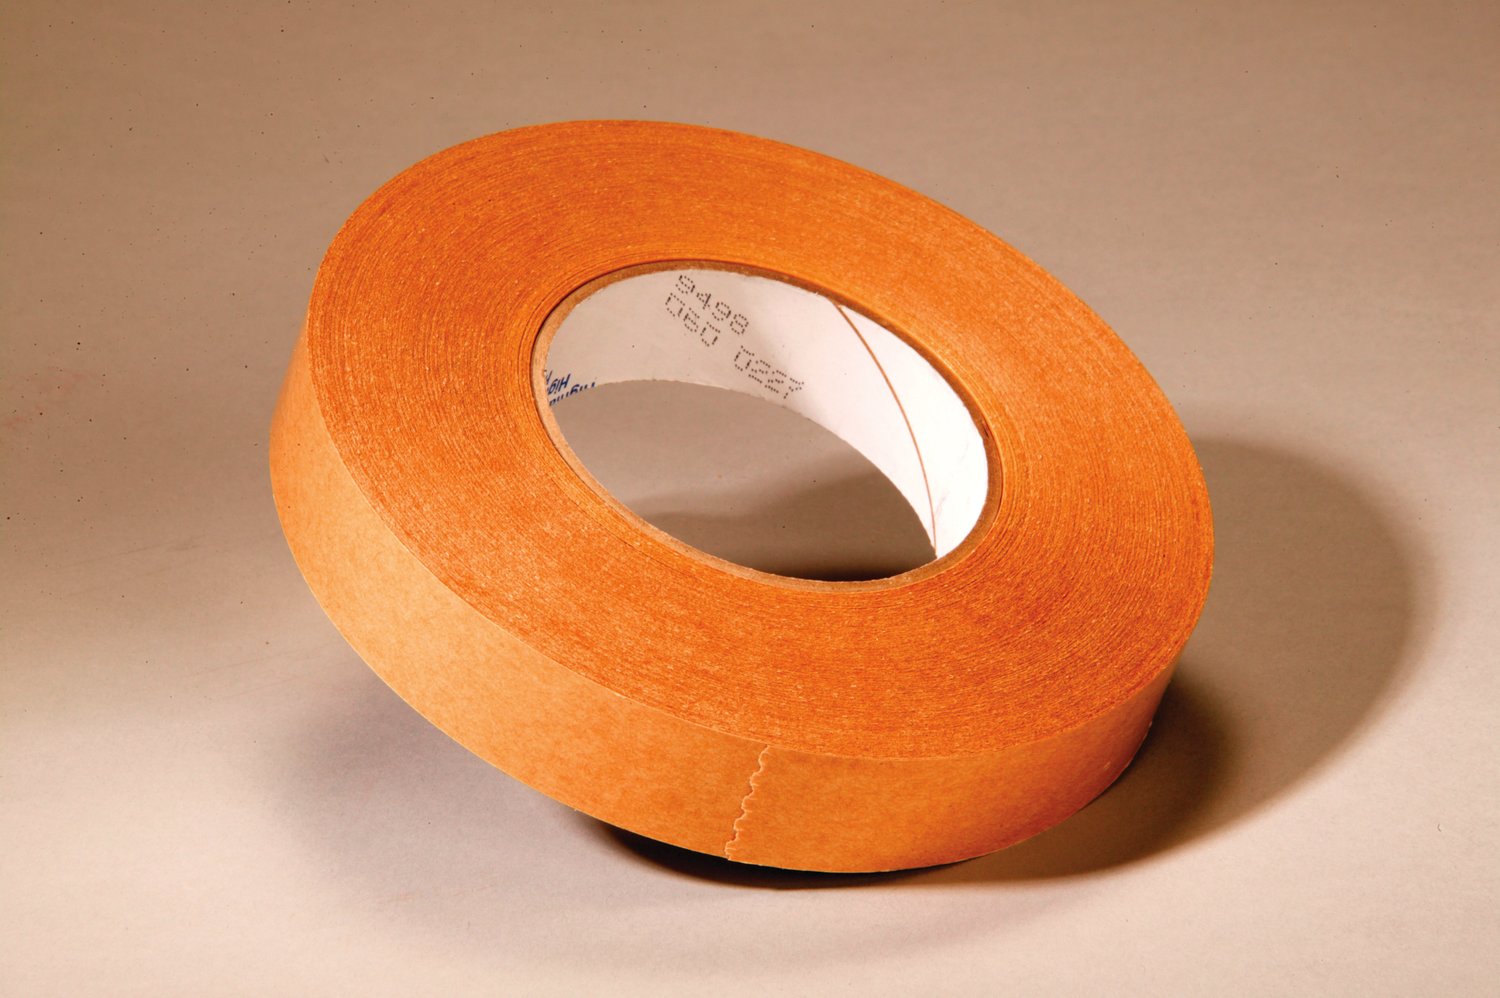 7010334400 - 3M Adhesive Transfer Tape 9498, Clear, 48 in x 180 yd, 2 mil, 1 roll
per case